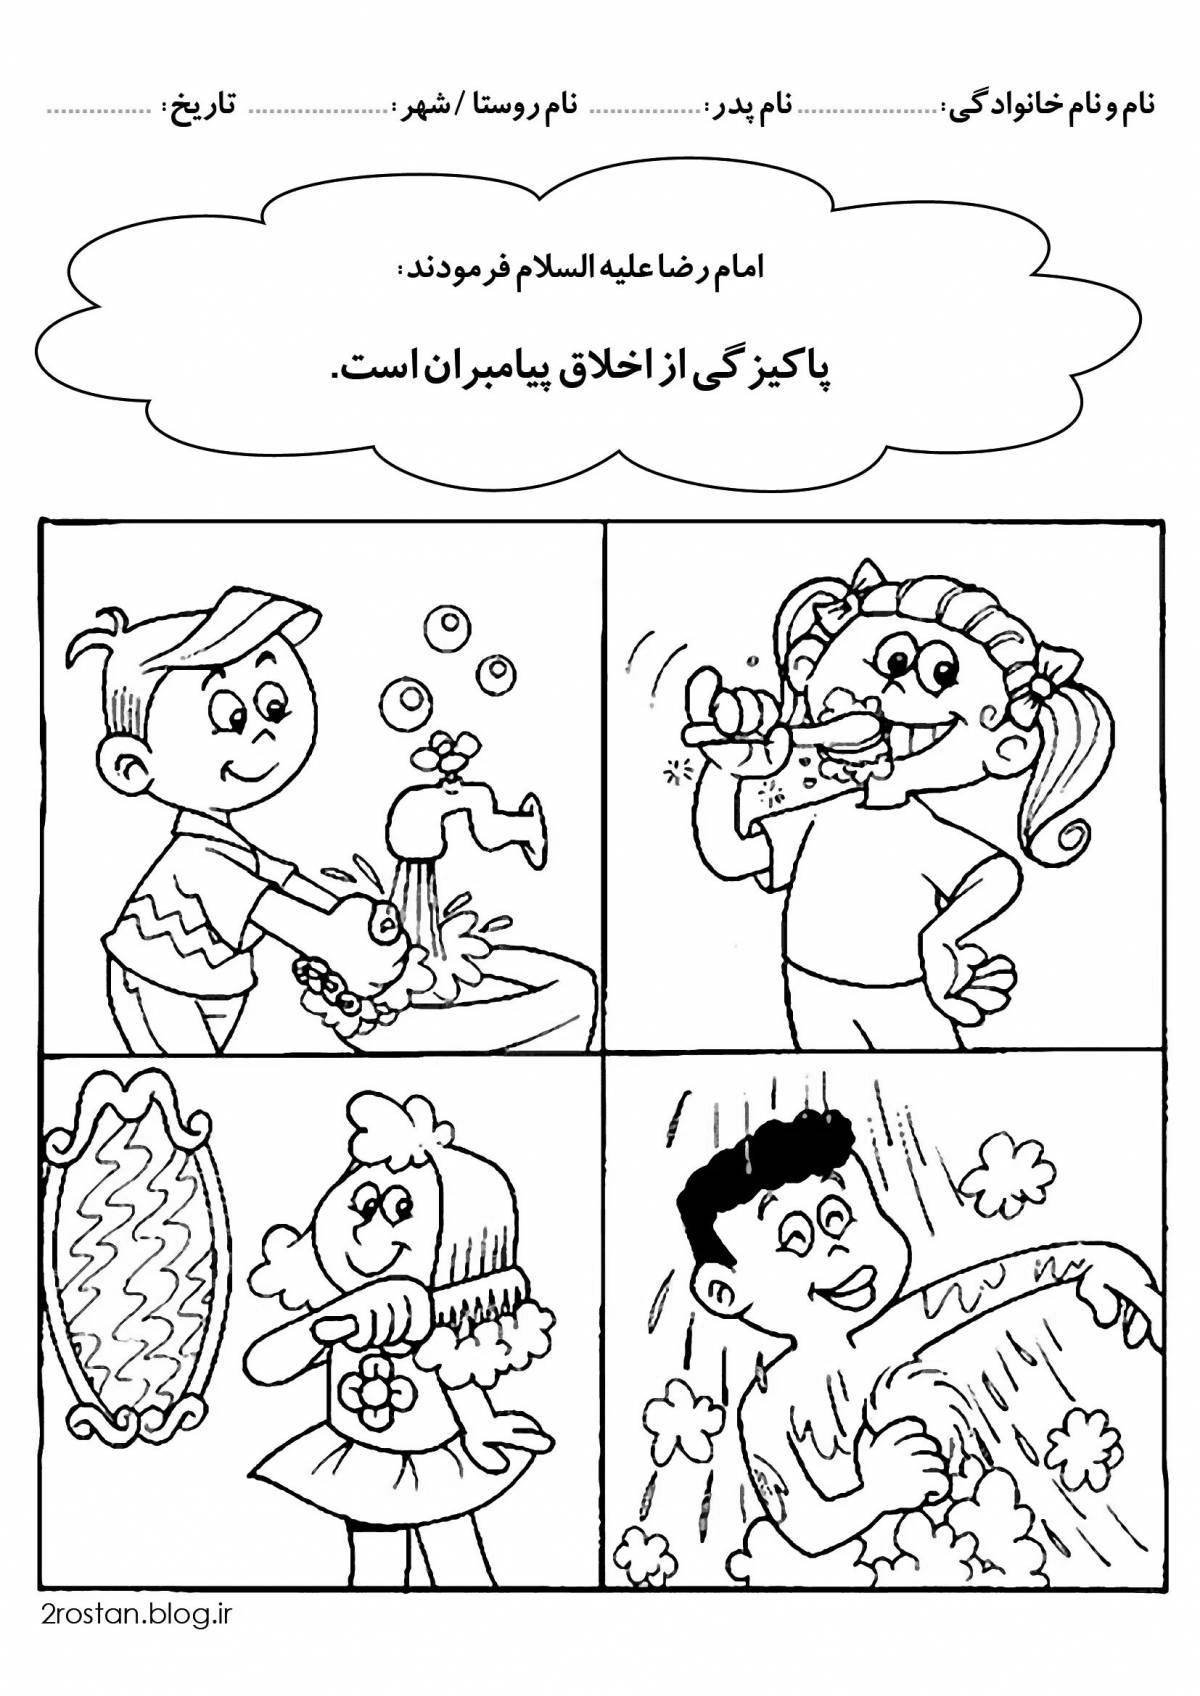 Colorful hygiene coloring page for beginners